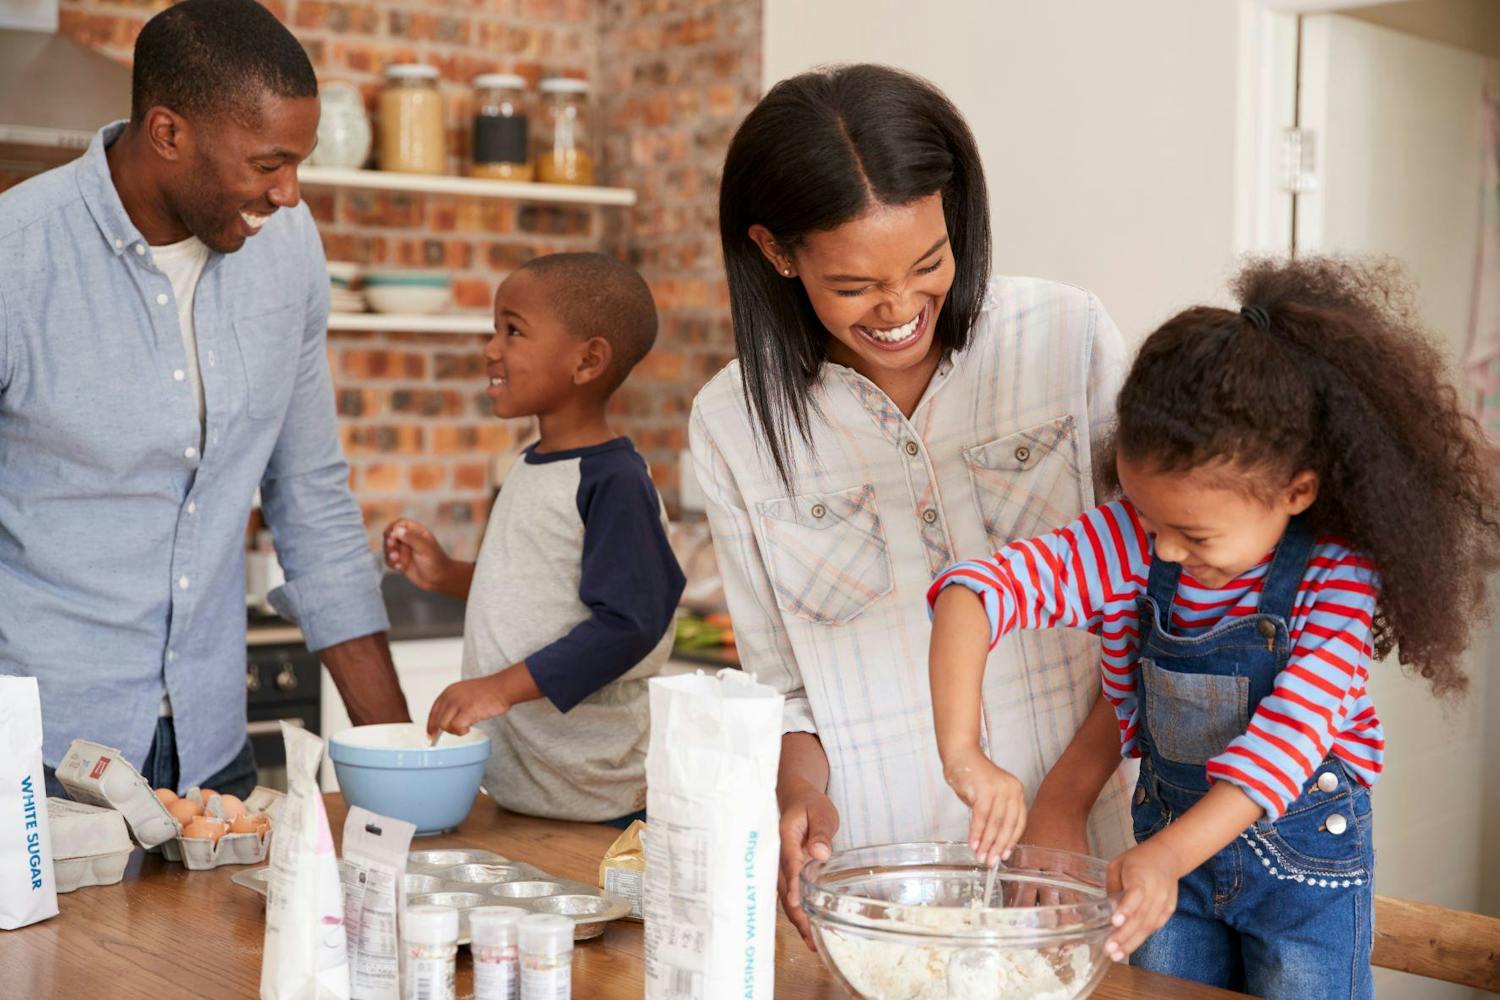 Cooking with Toddlers and Kids: Solving Common Problems - Happy